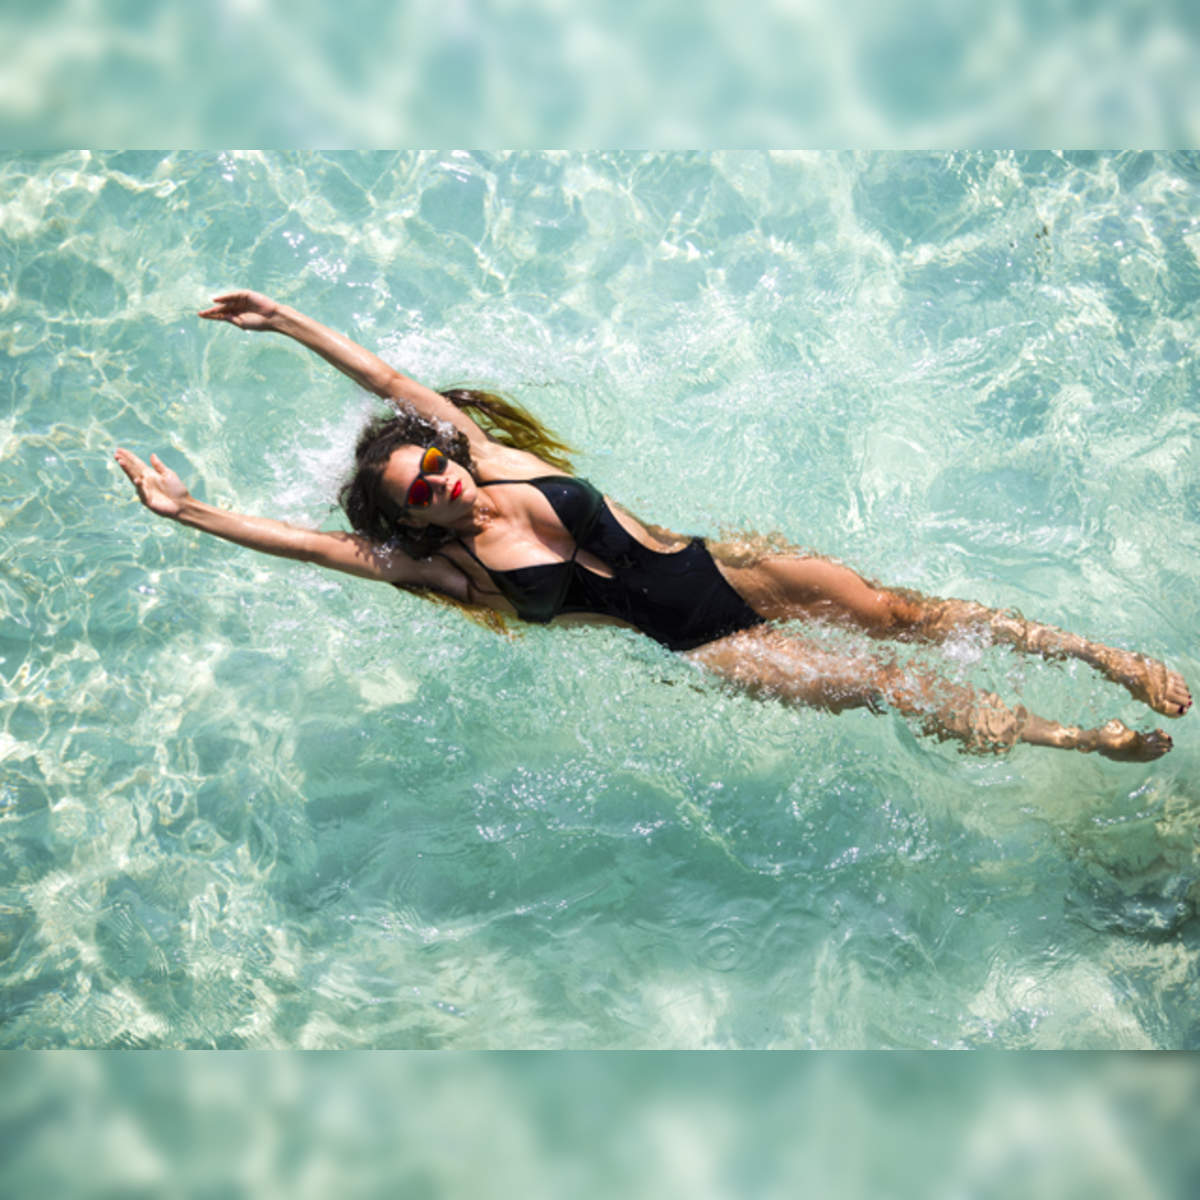 Swimsuit: Who says swimsuits need to be waterproof ? - The Economic Times